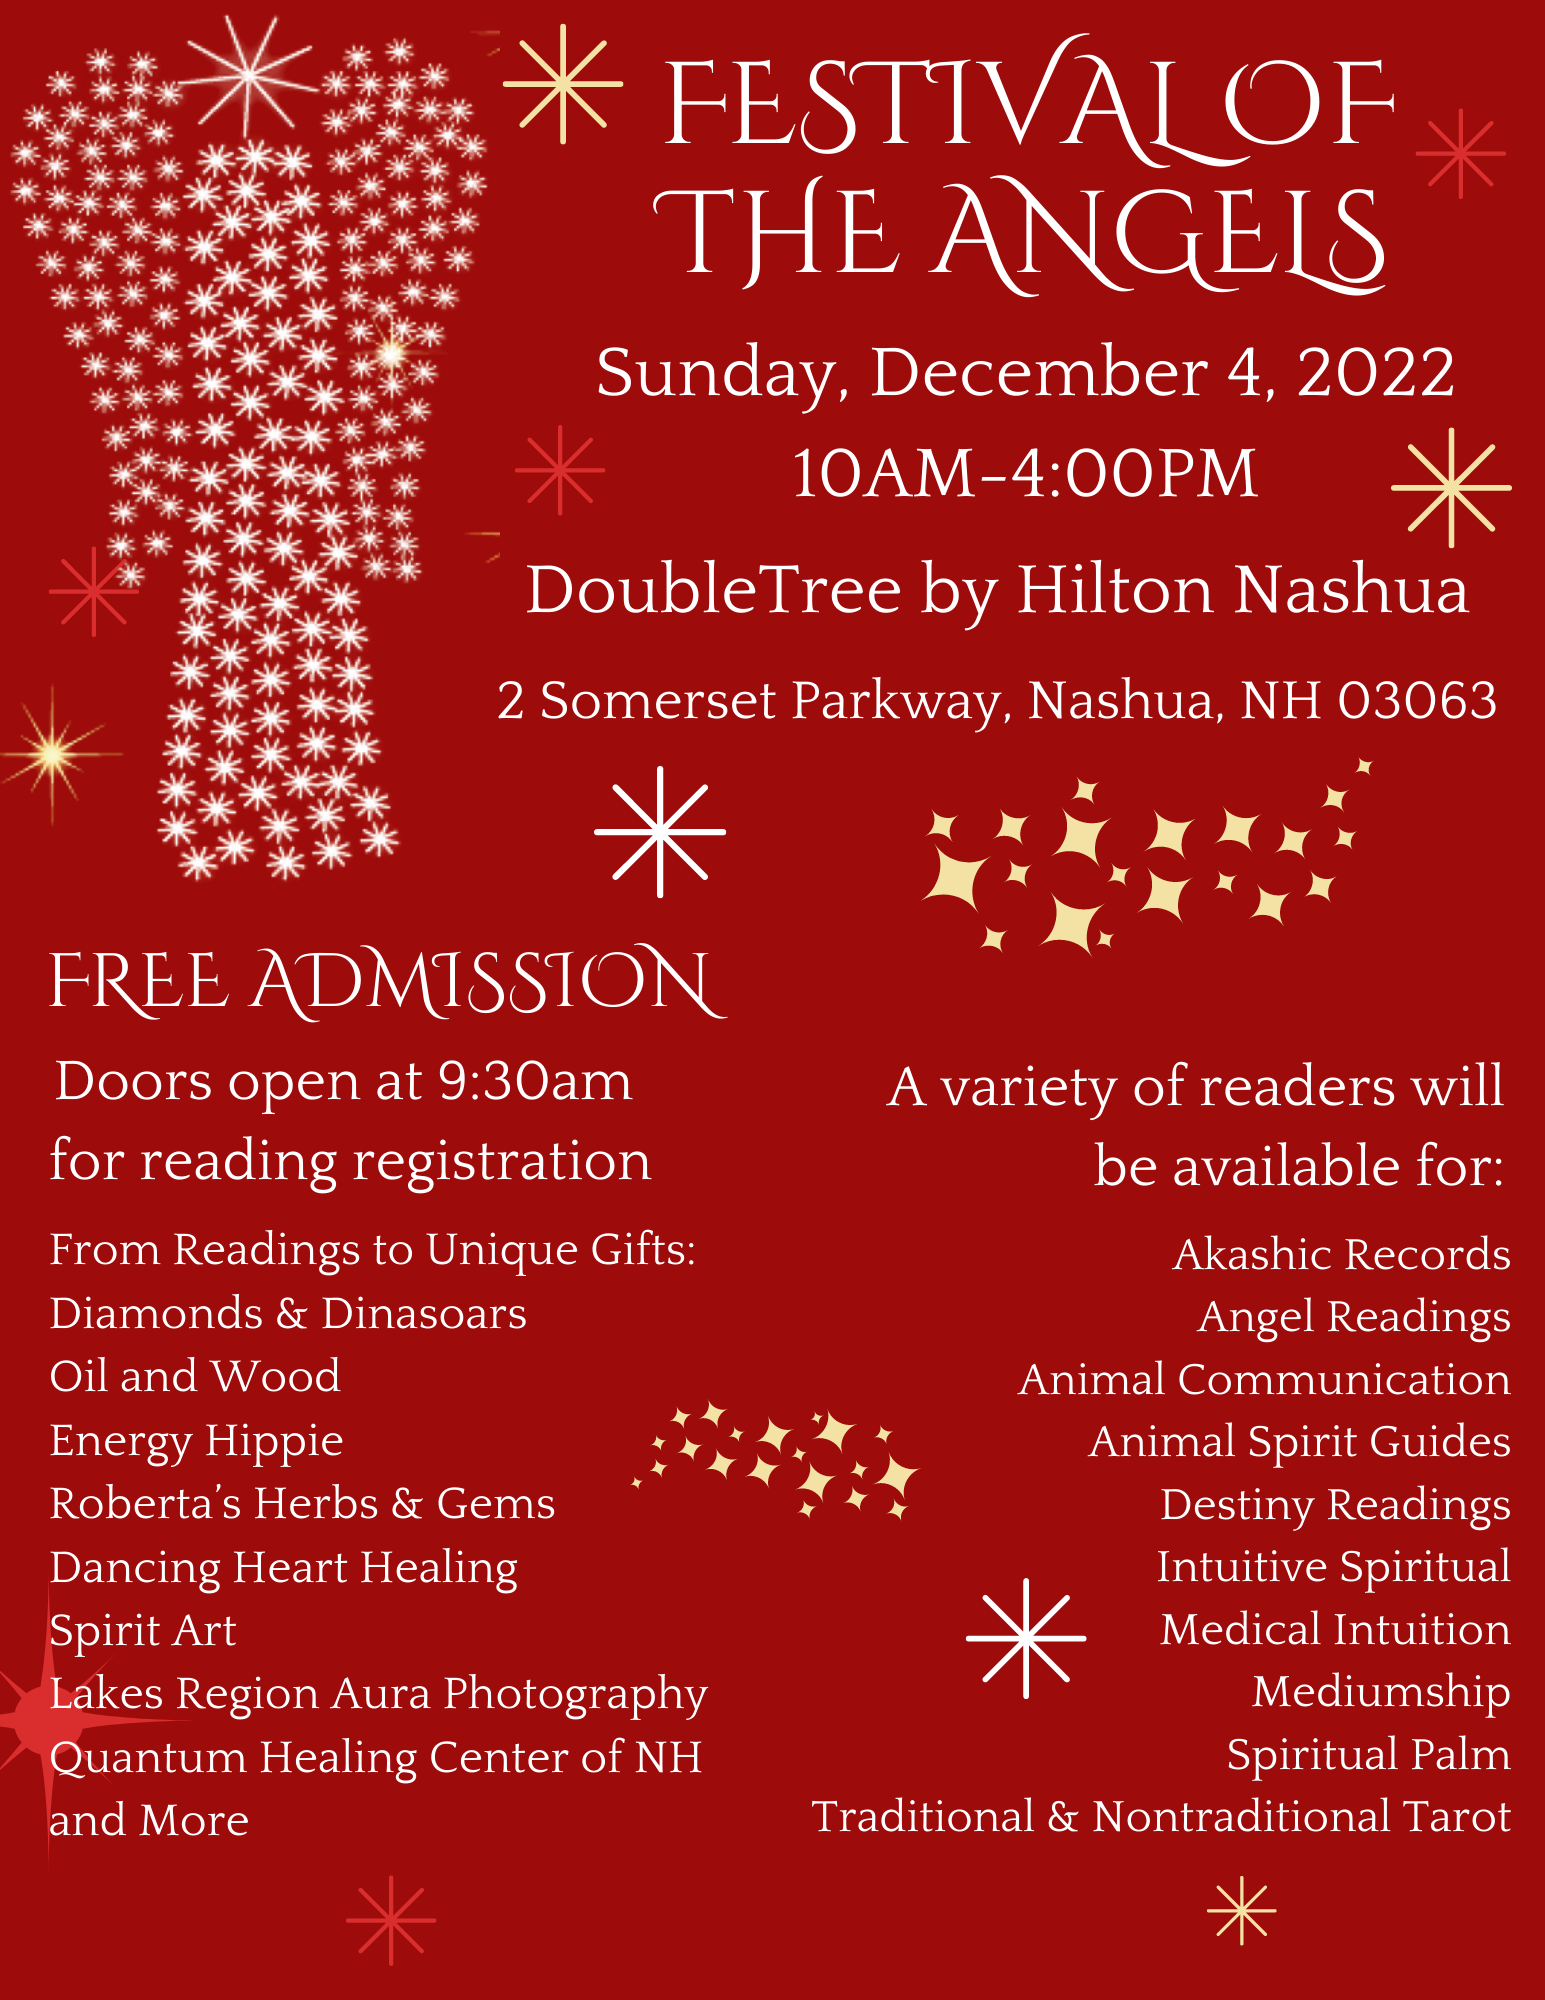 Festival of the Angels